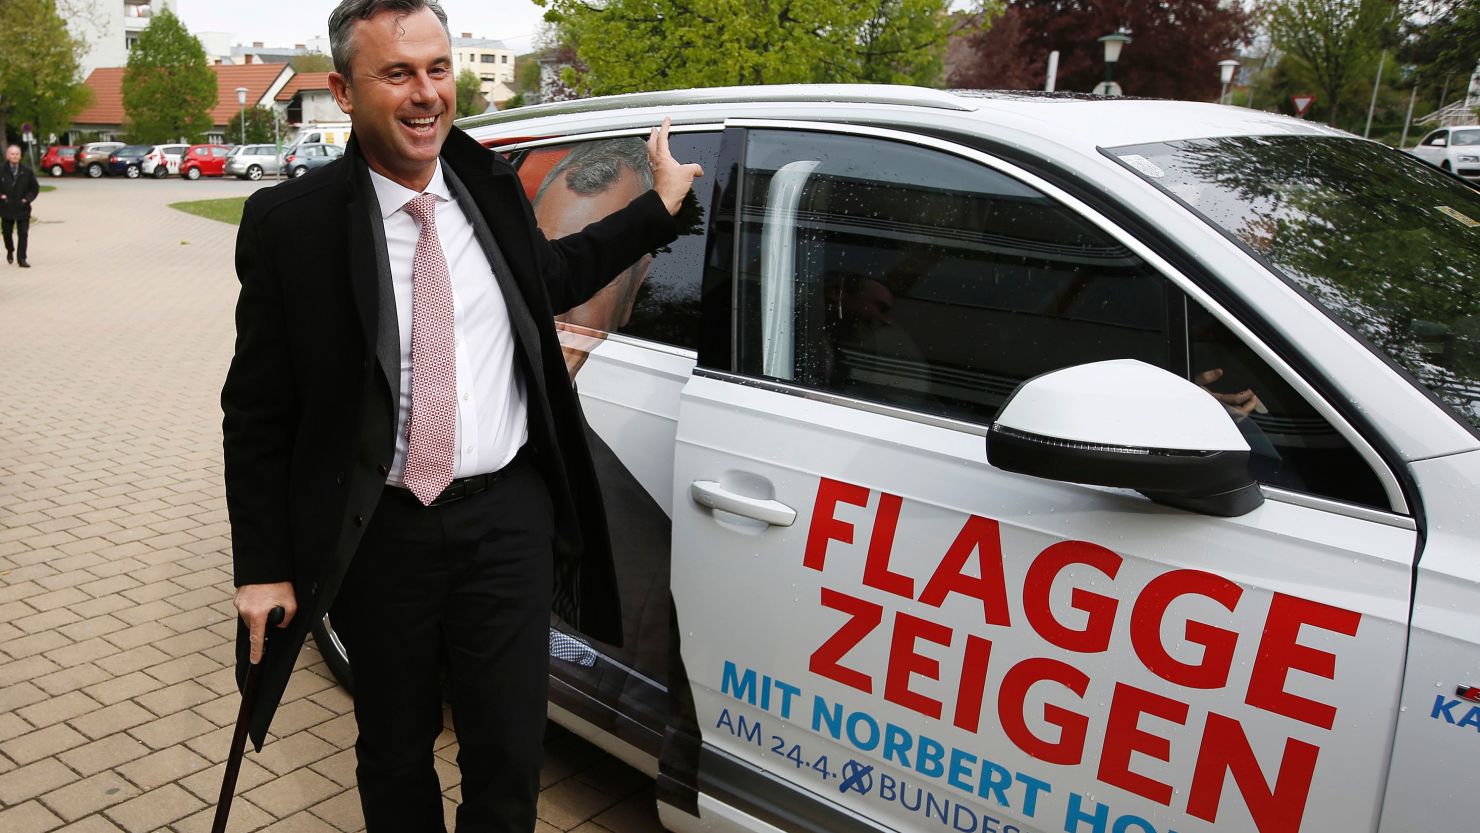 Far-right candidate Norbert Hofer has carried a walking stick since a paragliding accident in 2003.